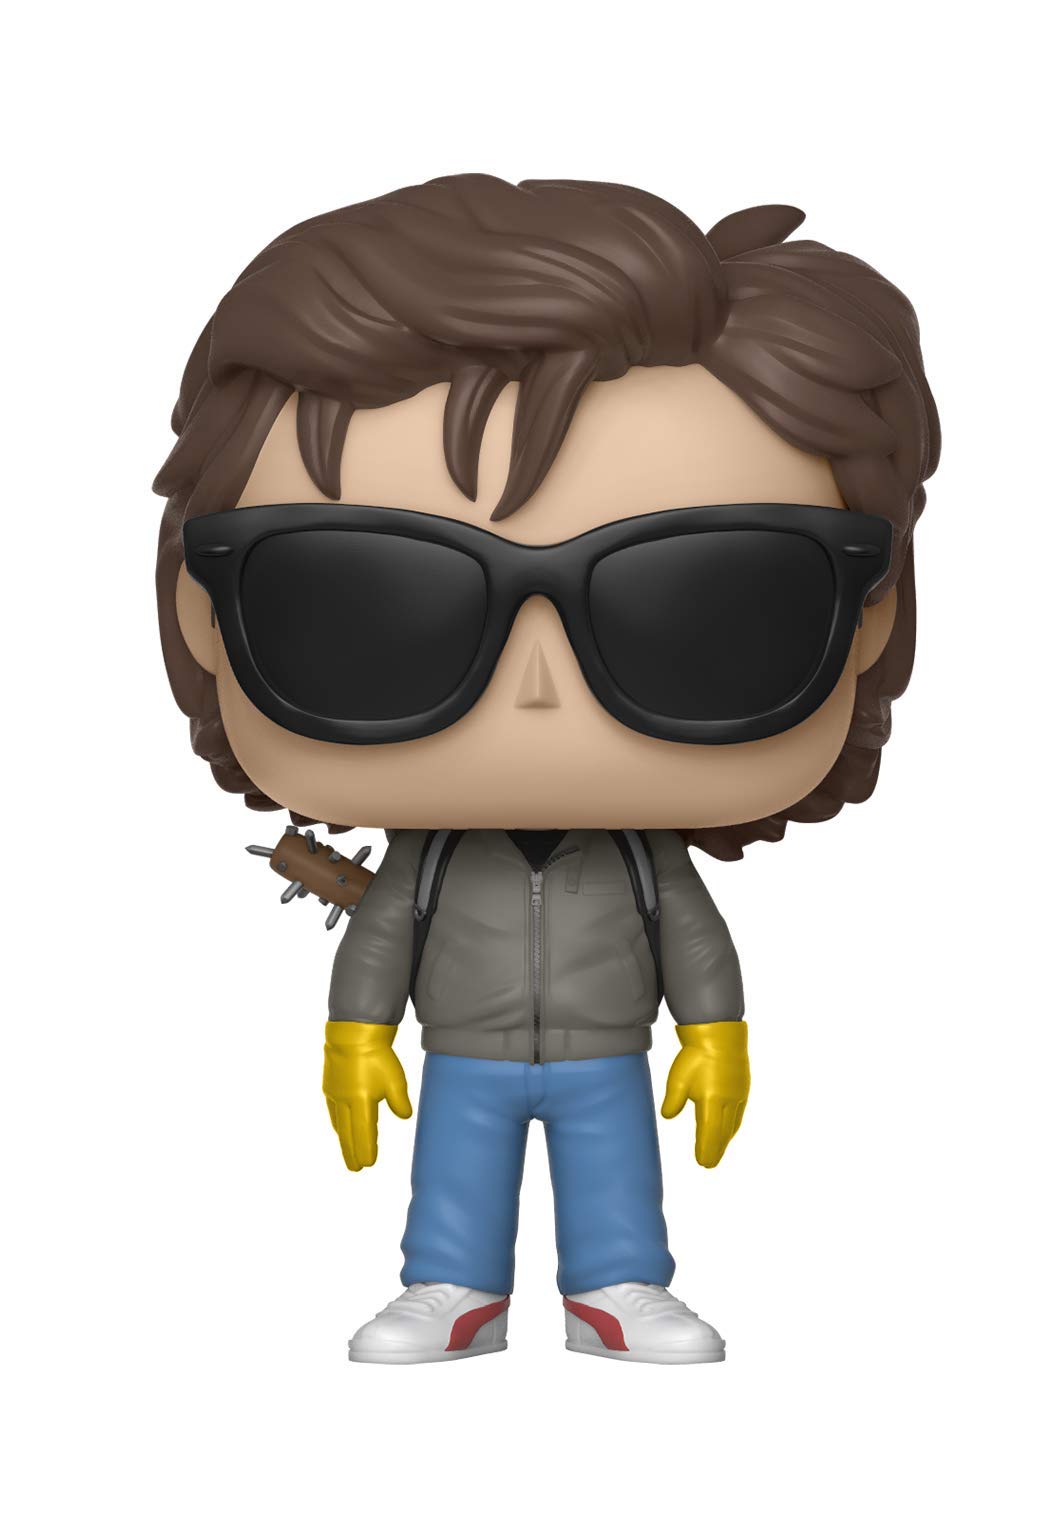 Funko POP! Television Strangers Things Steve with Sunglasses